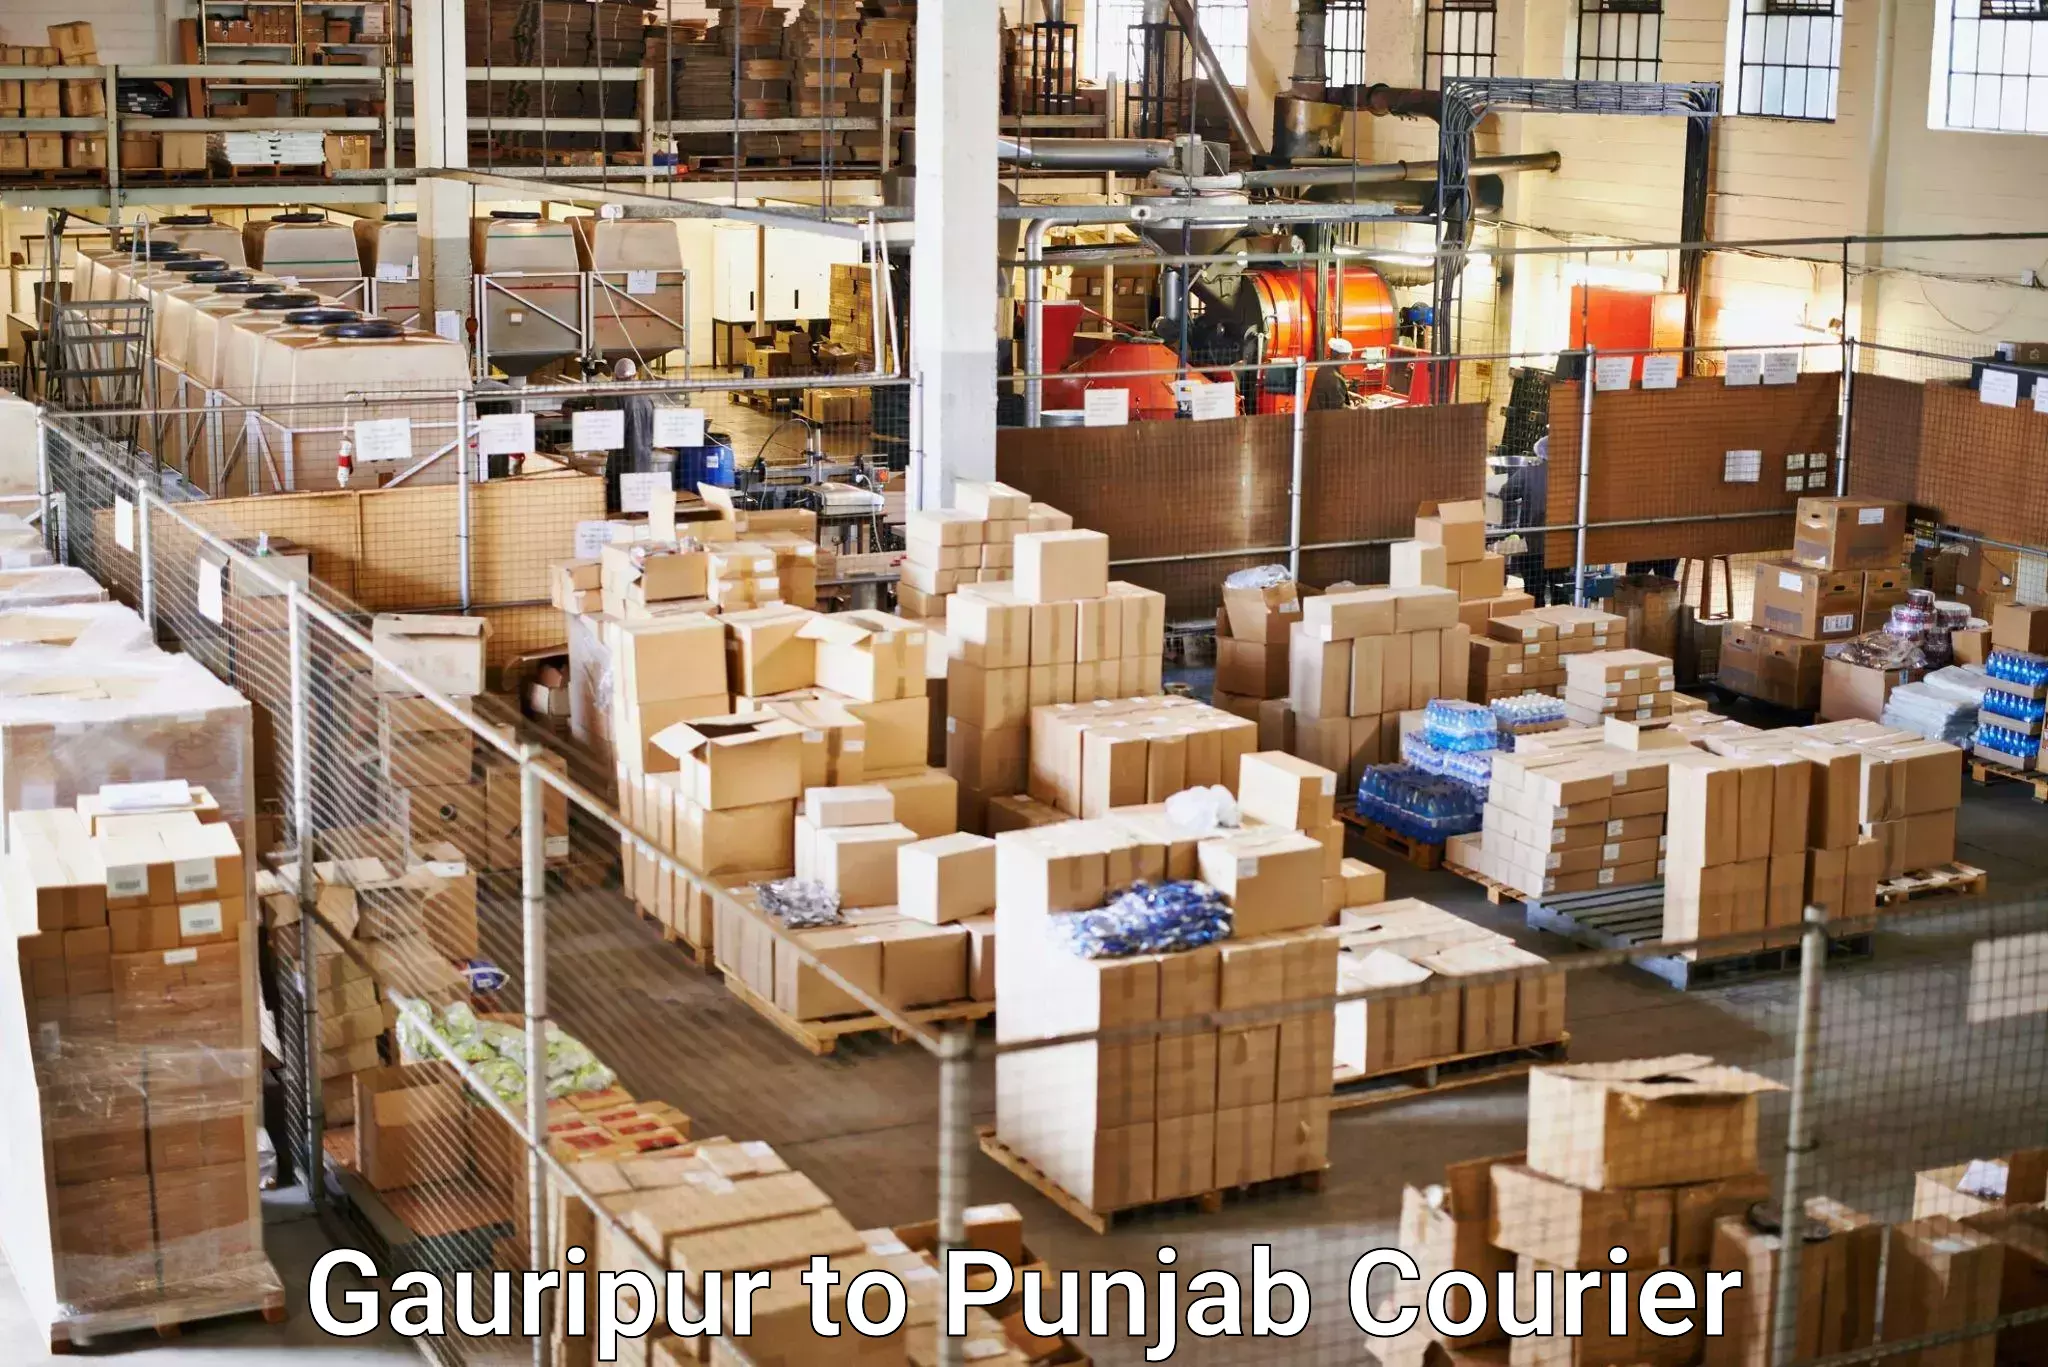 Sustainable shipping practices Gauripur to Mohali